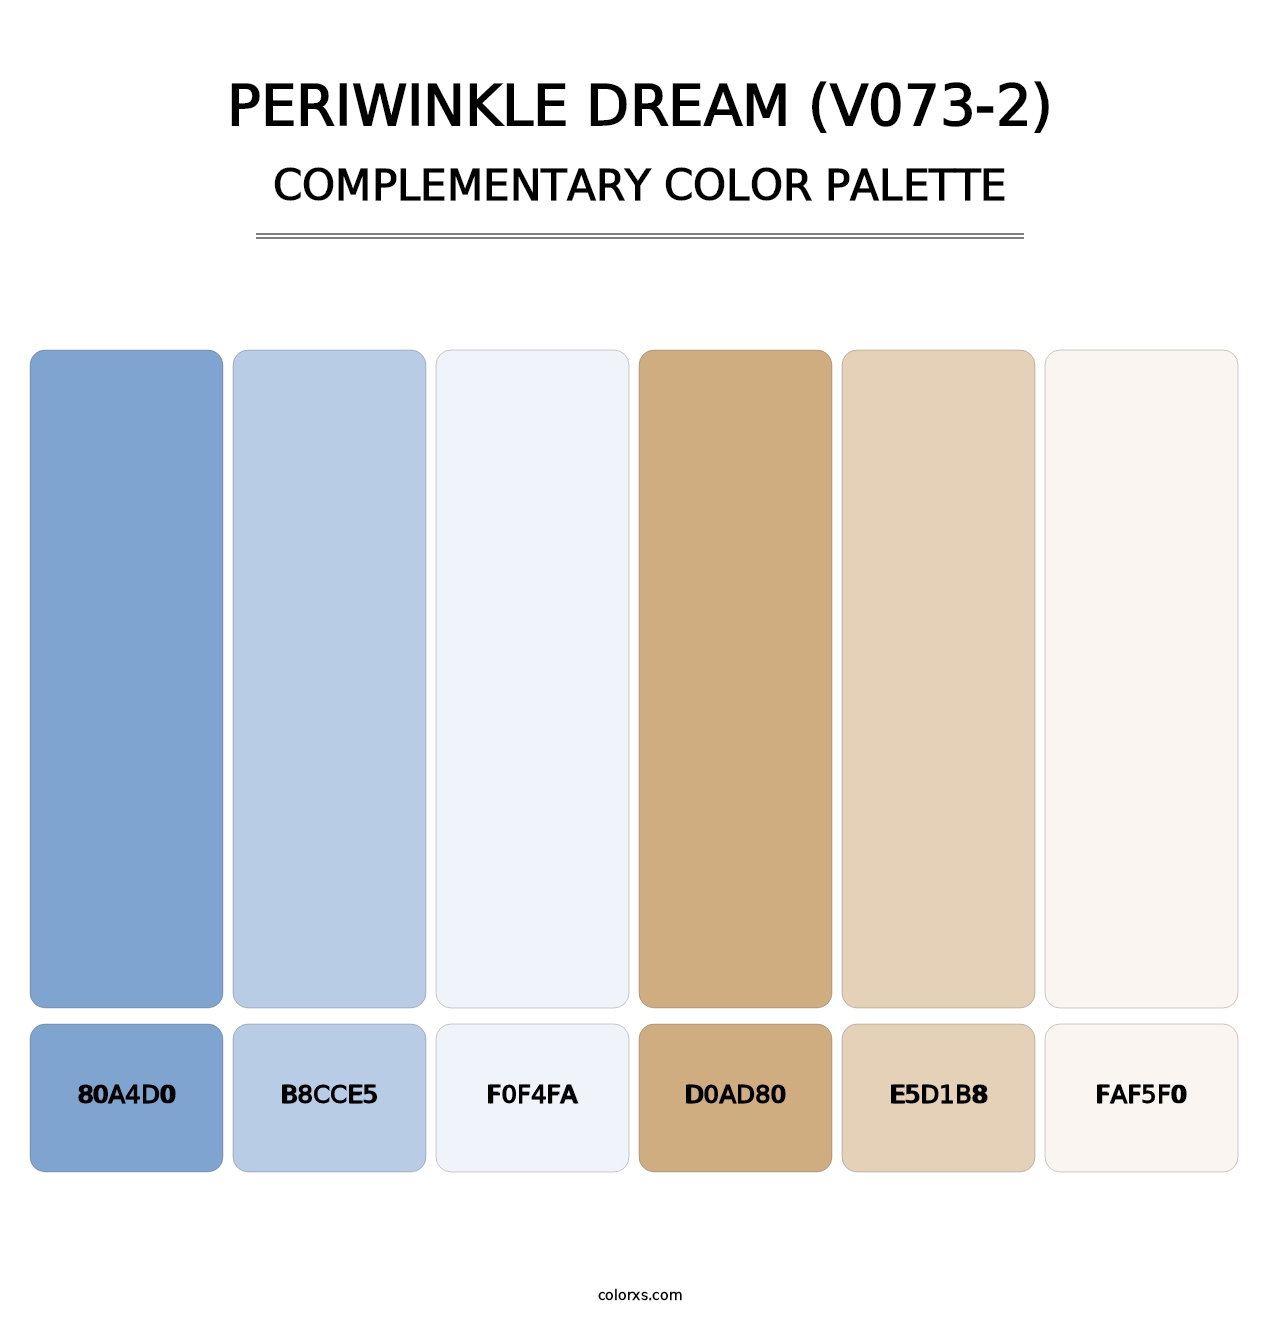 Periwinkle Dream (V073-2) - Complementary Color Palette